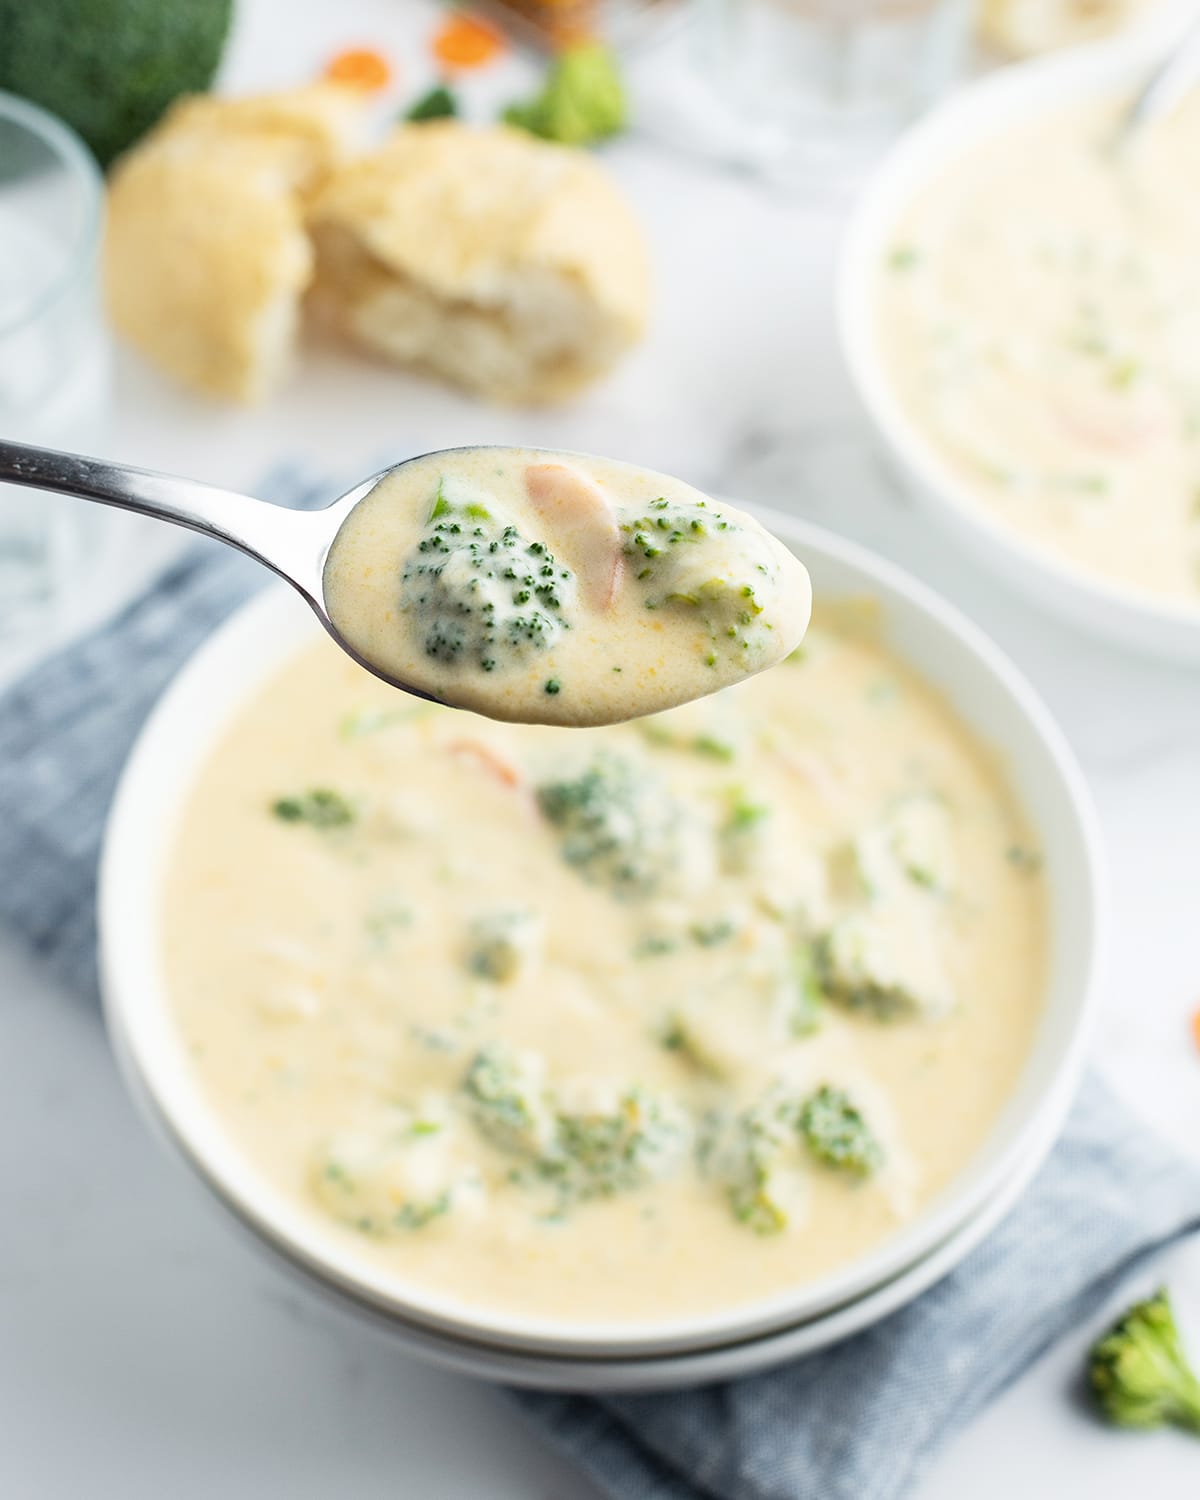 A spoonful of broccoli cheese soup above a bowl of broccoli cheese soup.